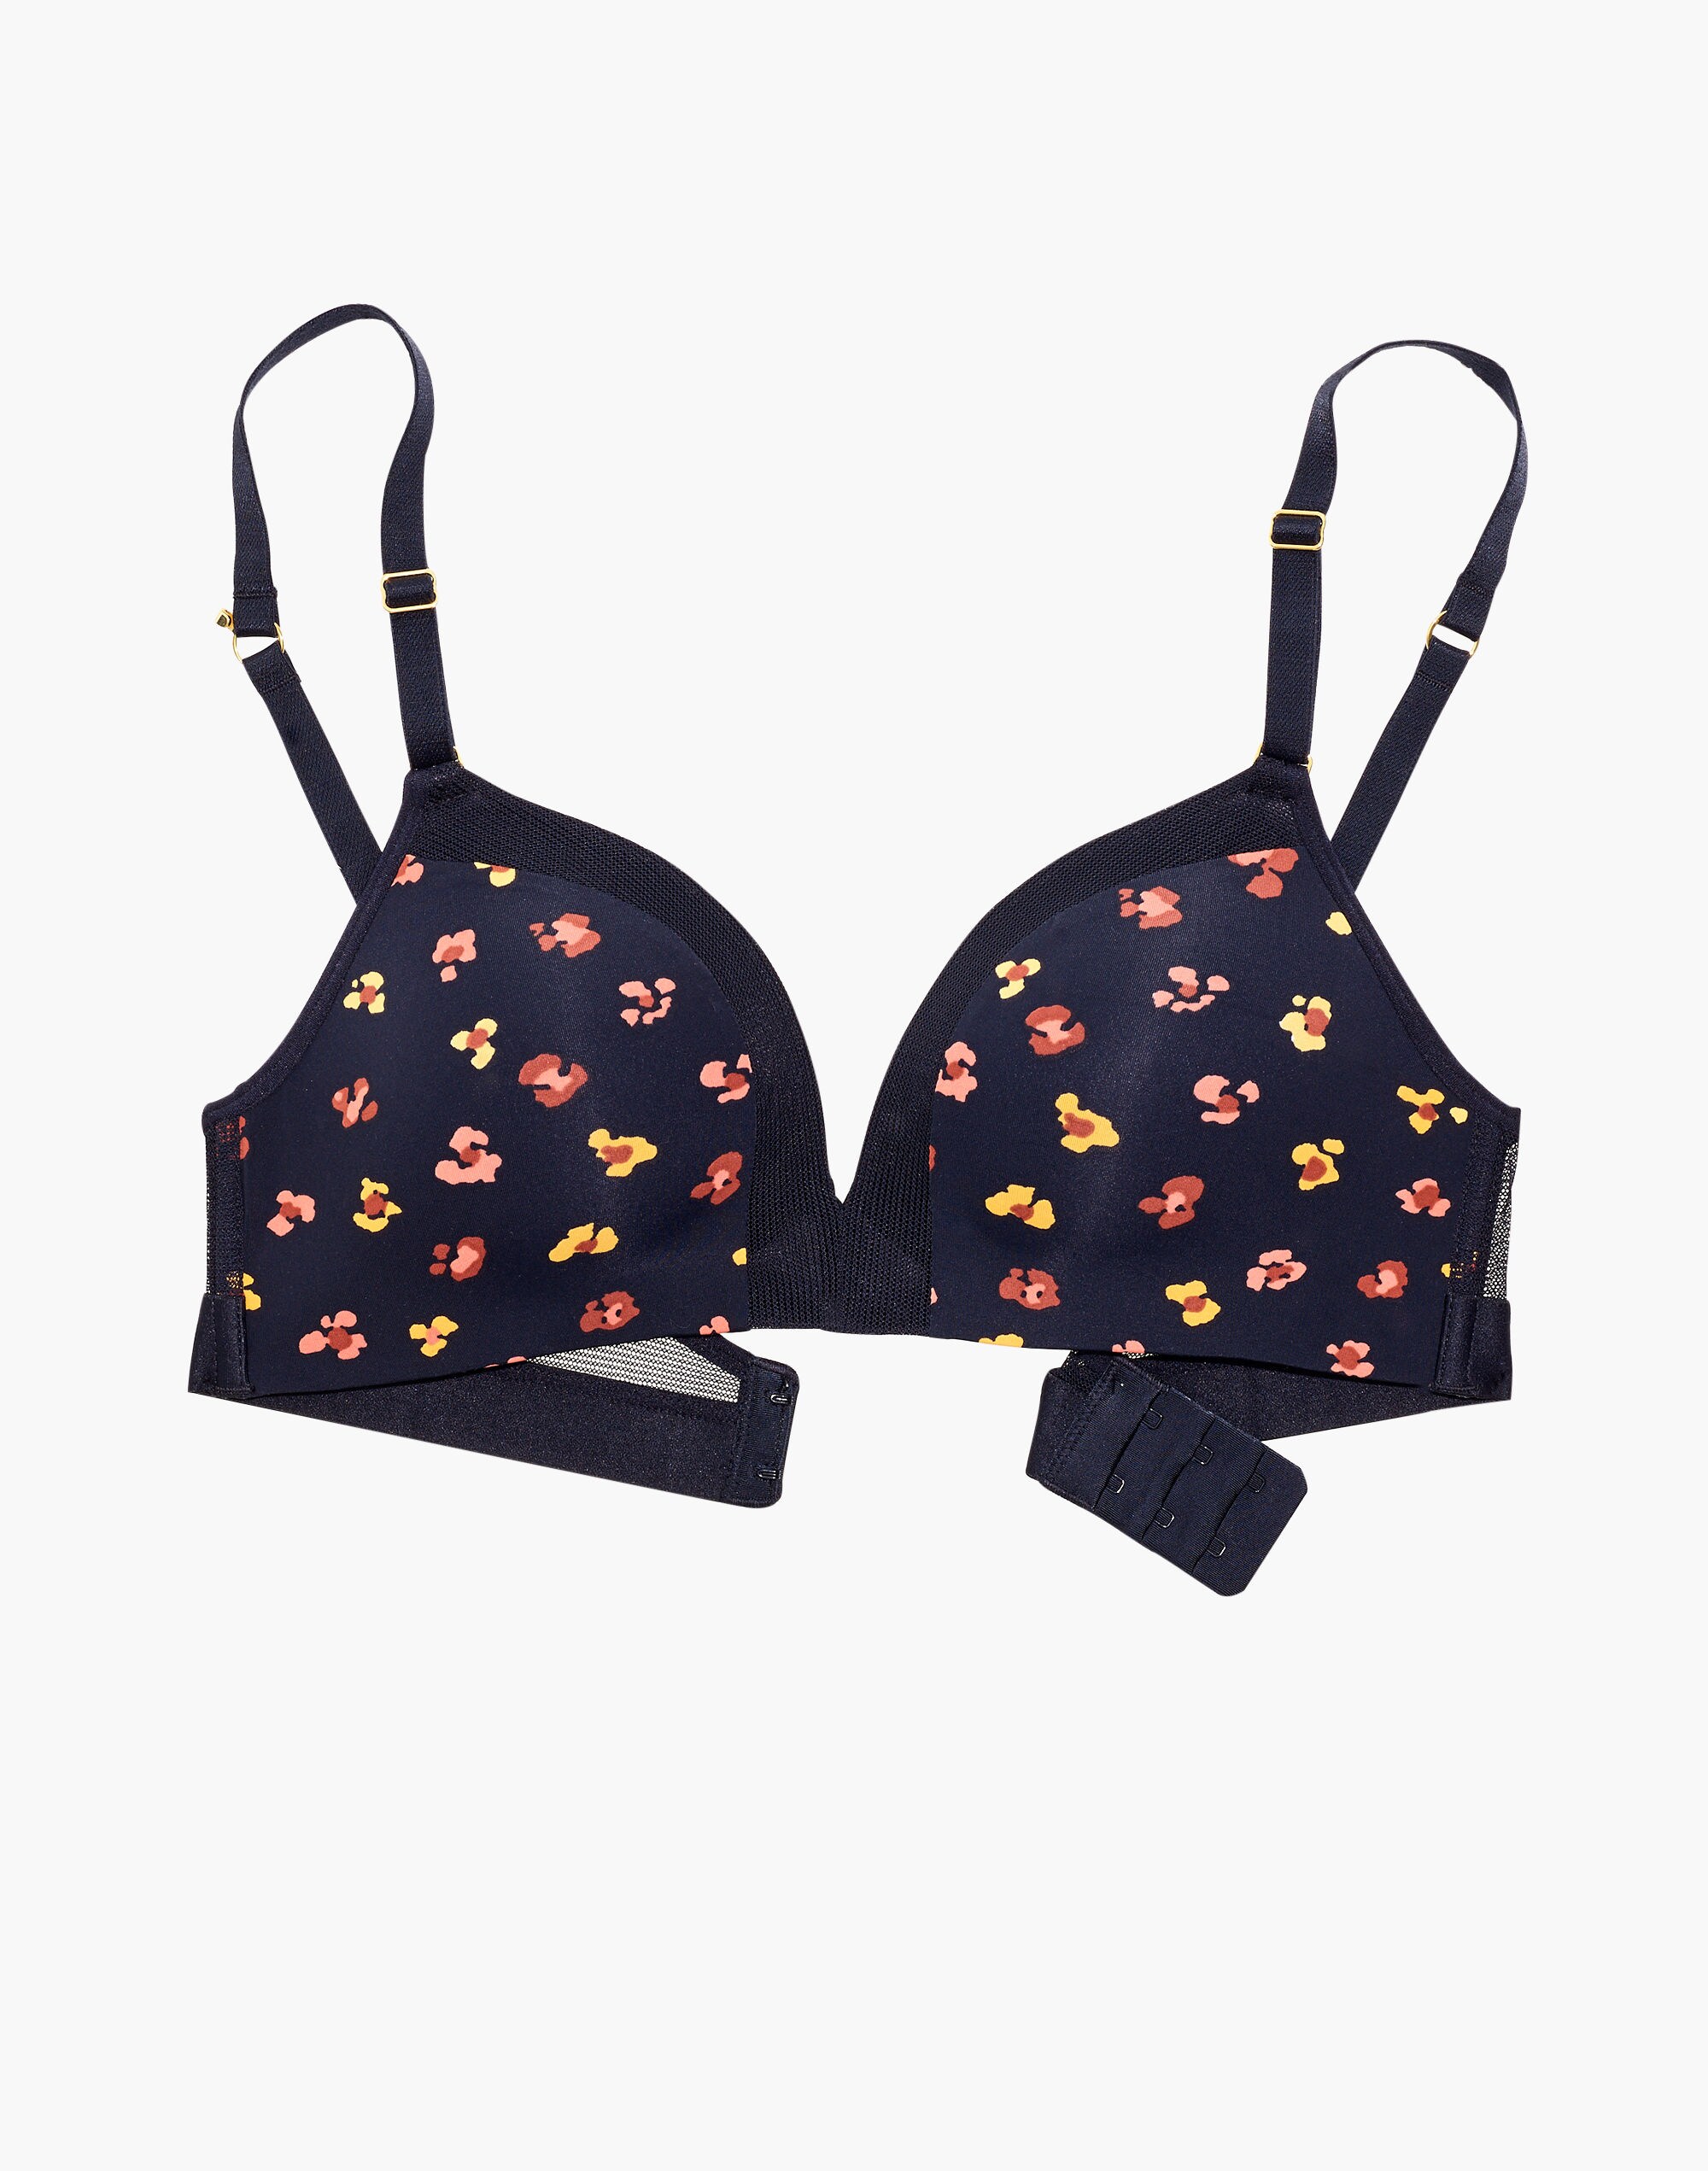 Madewell x Lively™ Mesh-Trim No-Wire Bra in Feline Floral